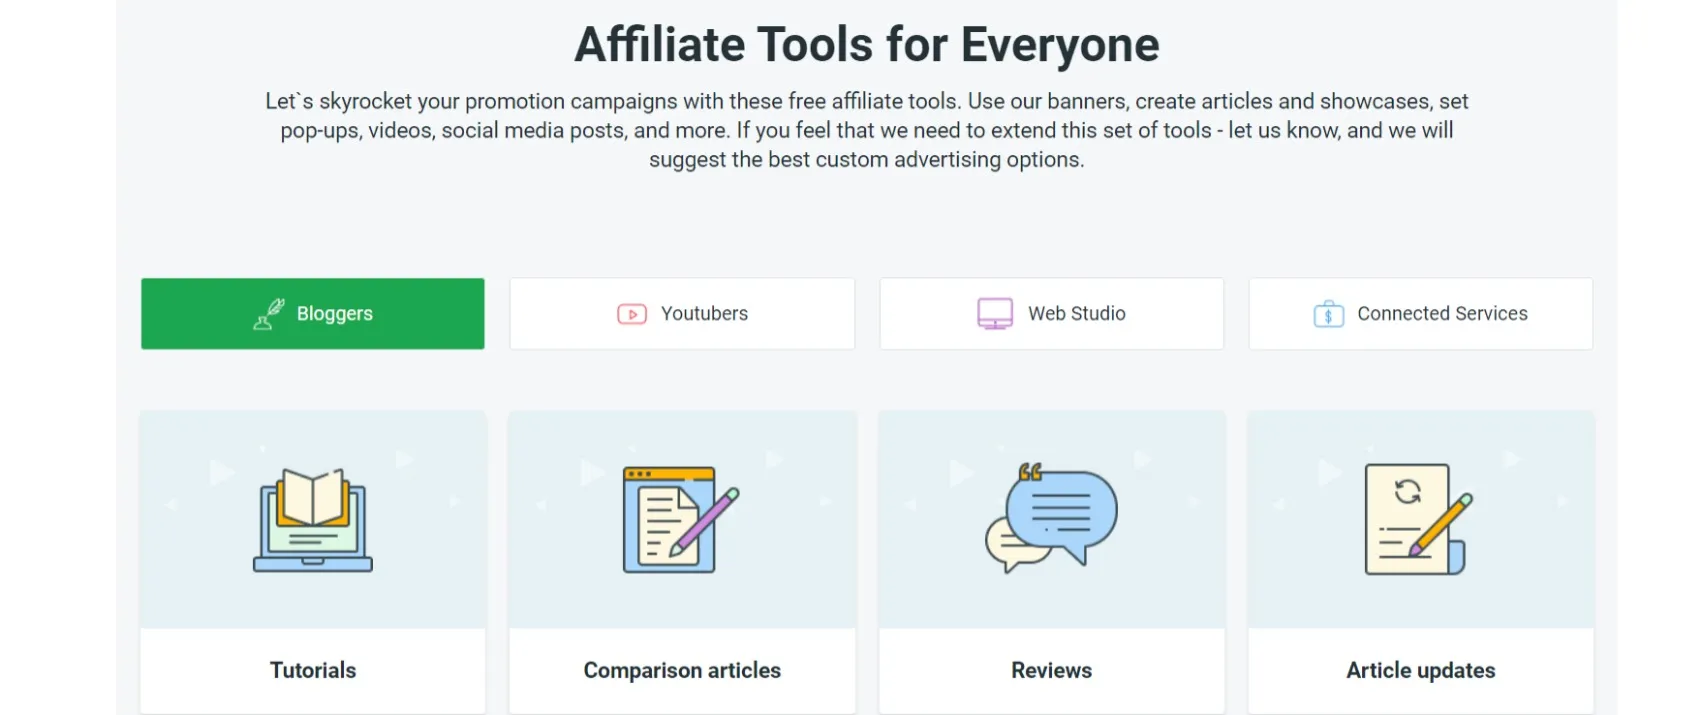 Affiliate Tools for Everyone